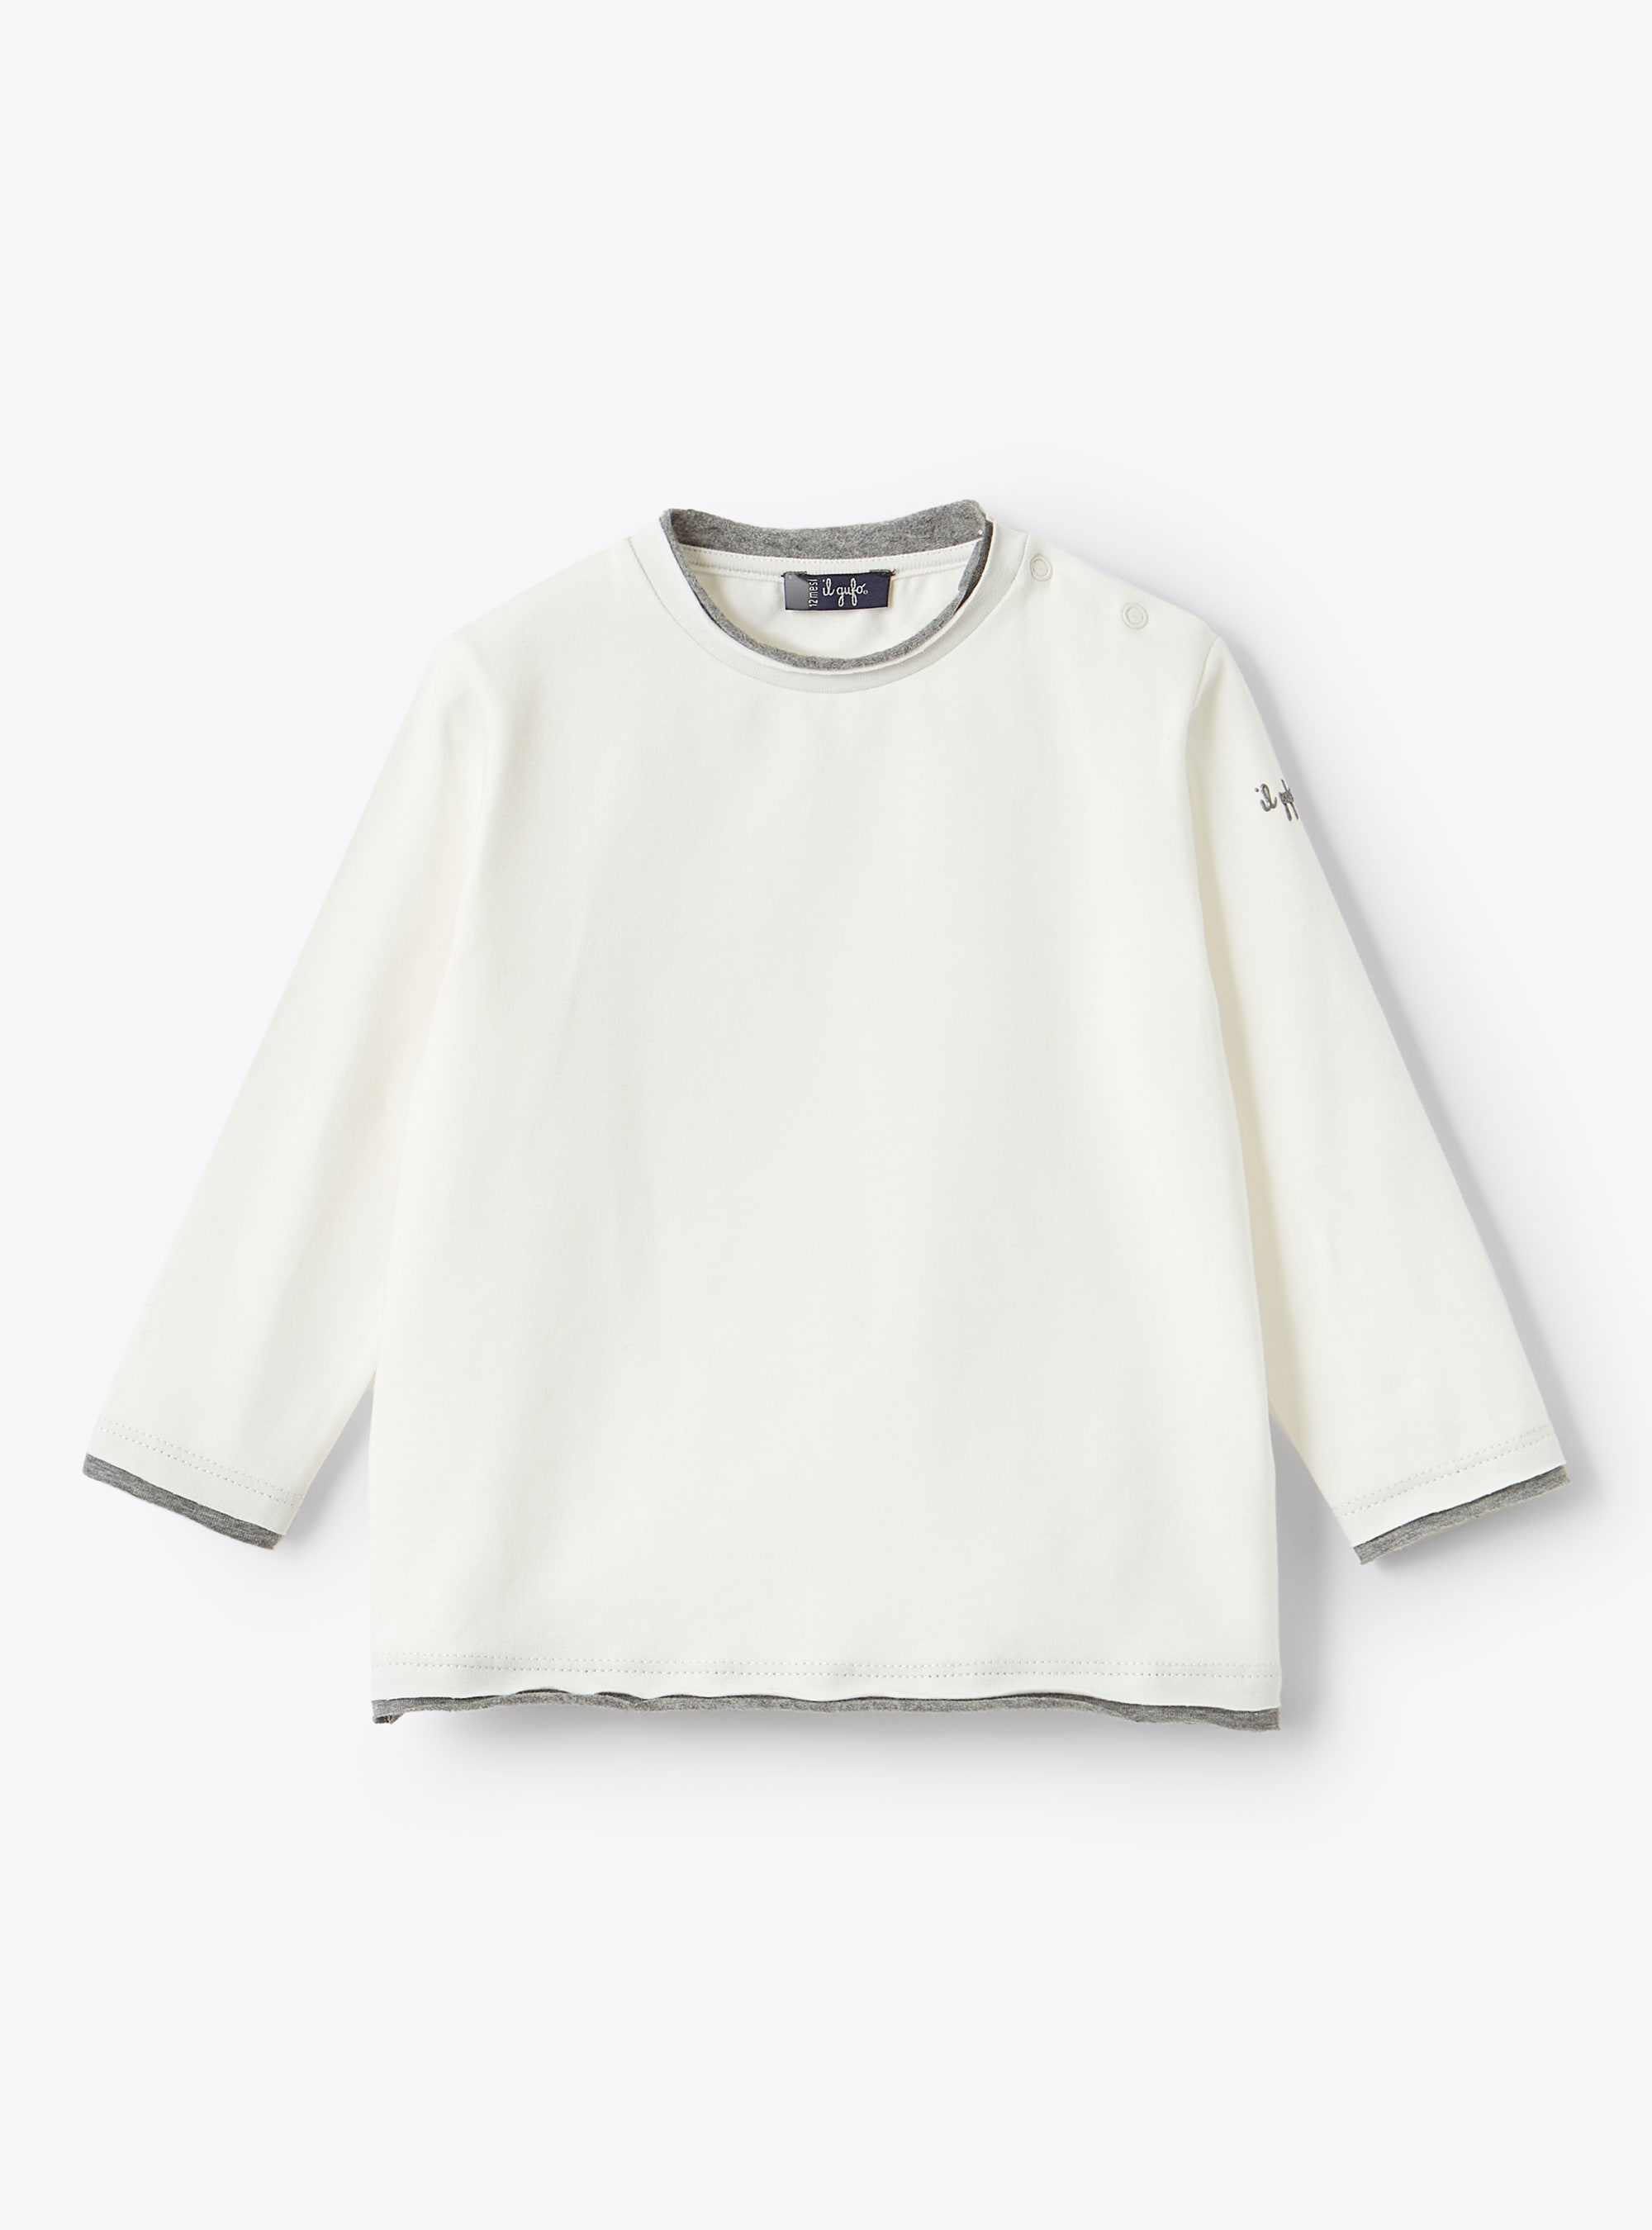 White T-shirt with contrast trims - White | Il Gufo